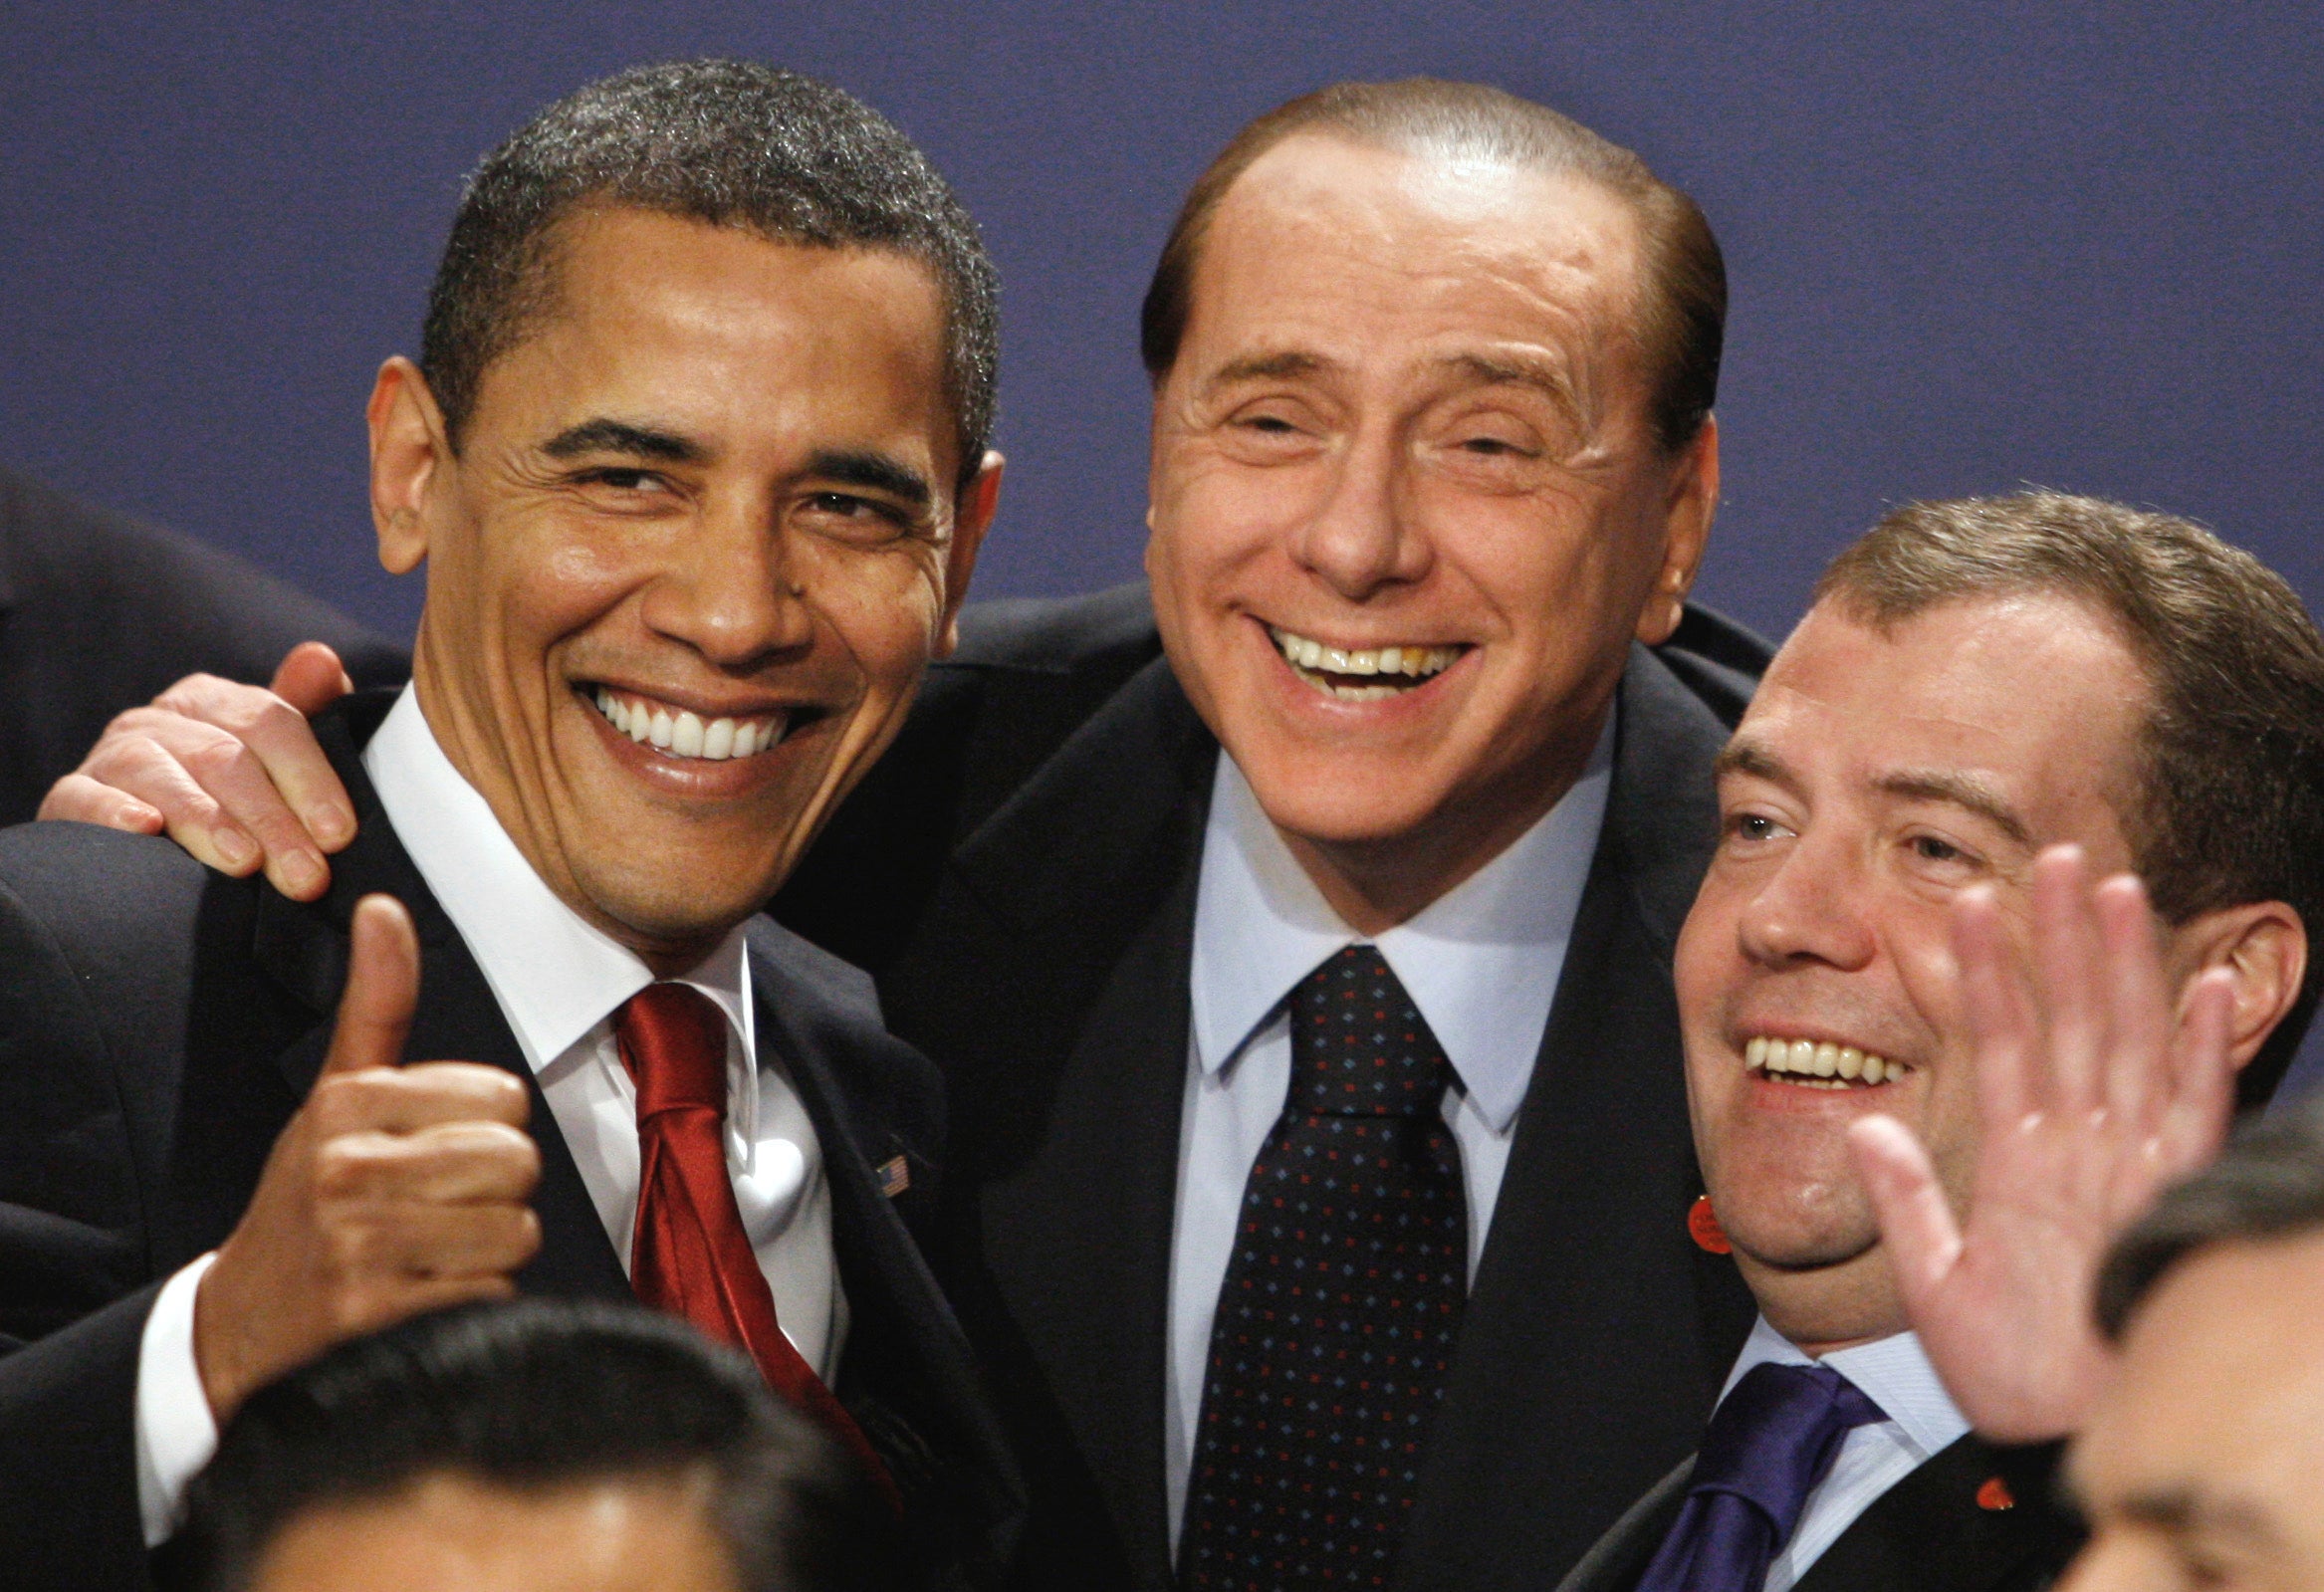 Berlusconi (centre) with Barack Obama and Russian president Dmitry Medvedev at the G20 summit in London in 2009